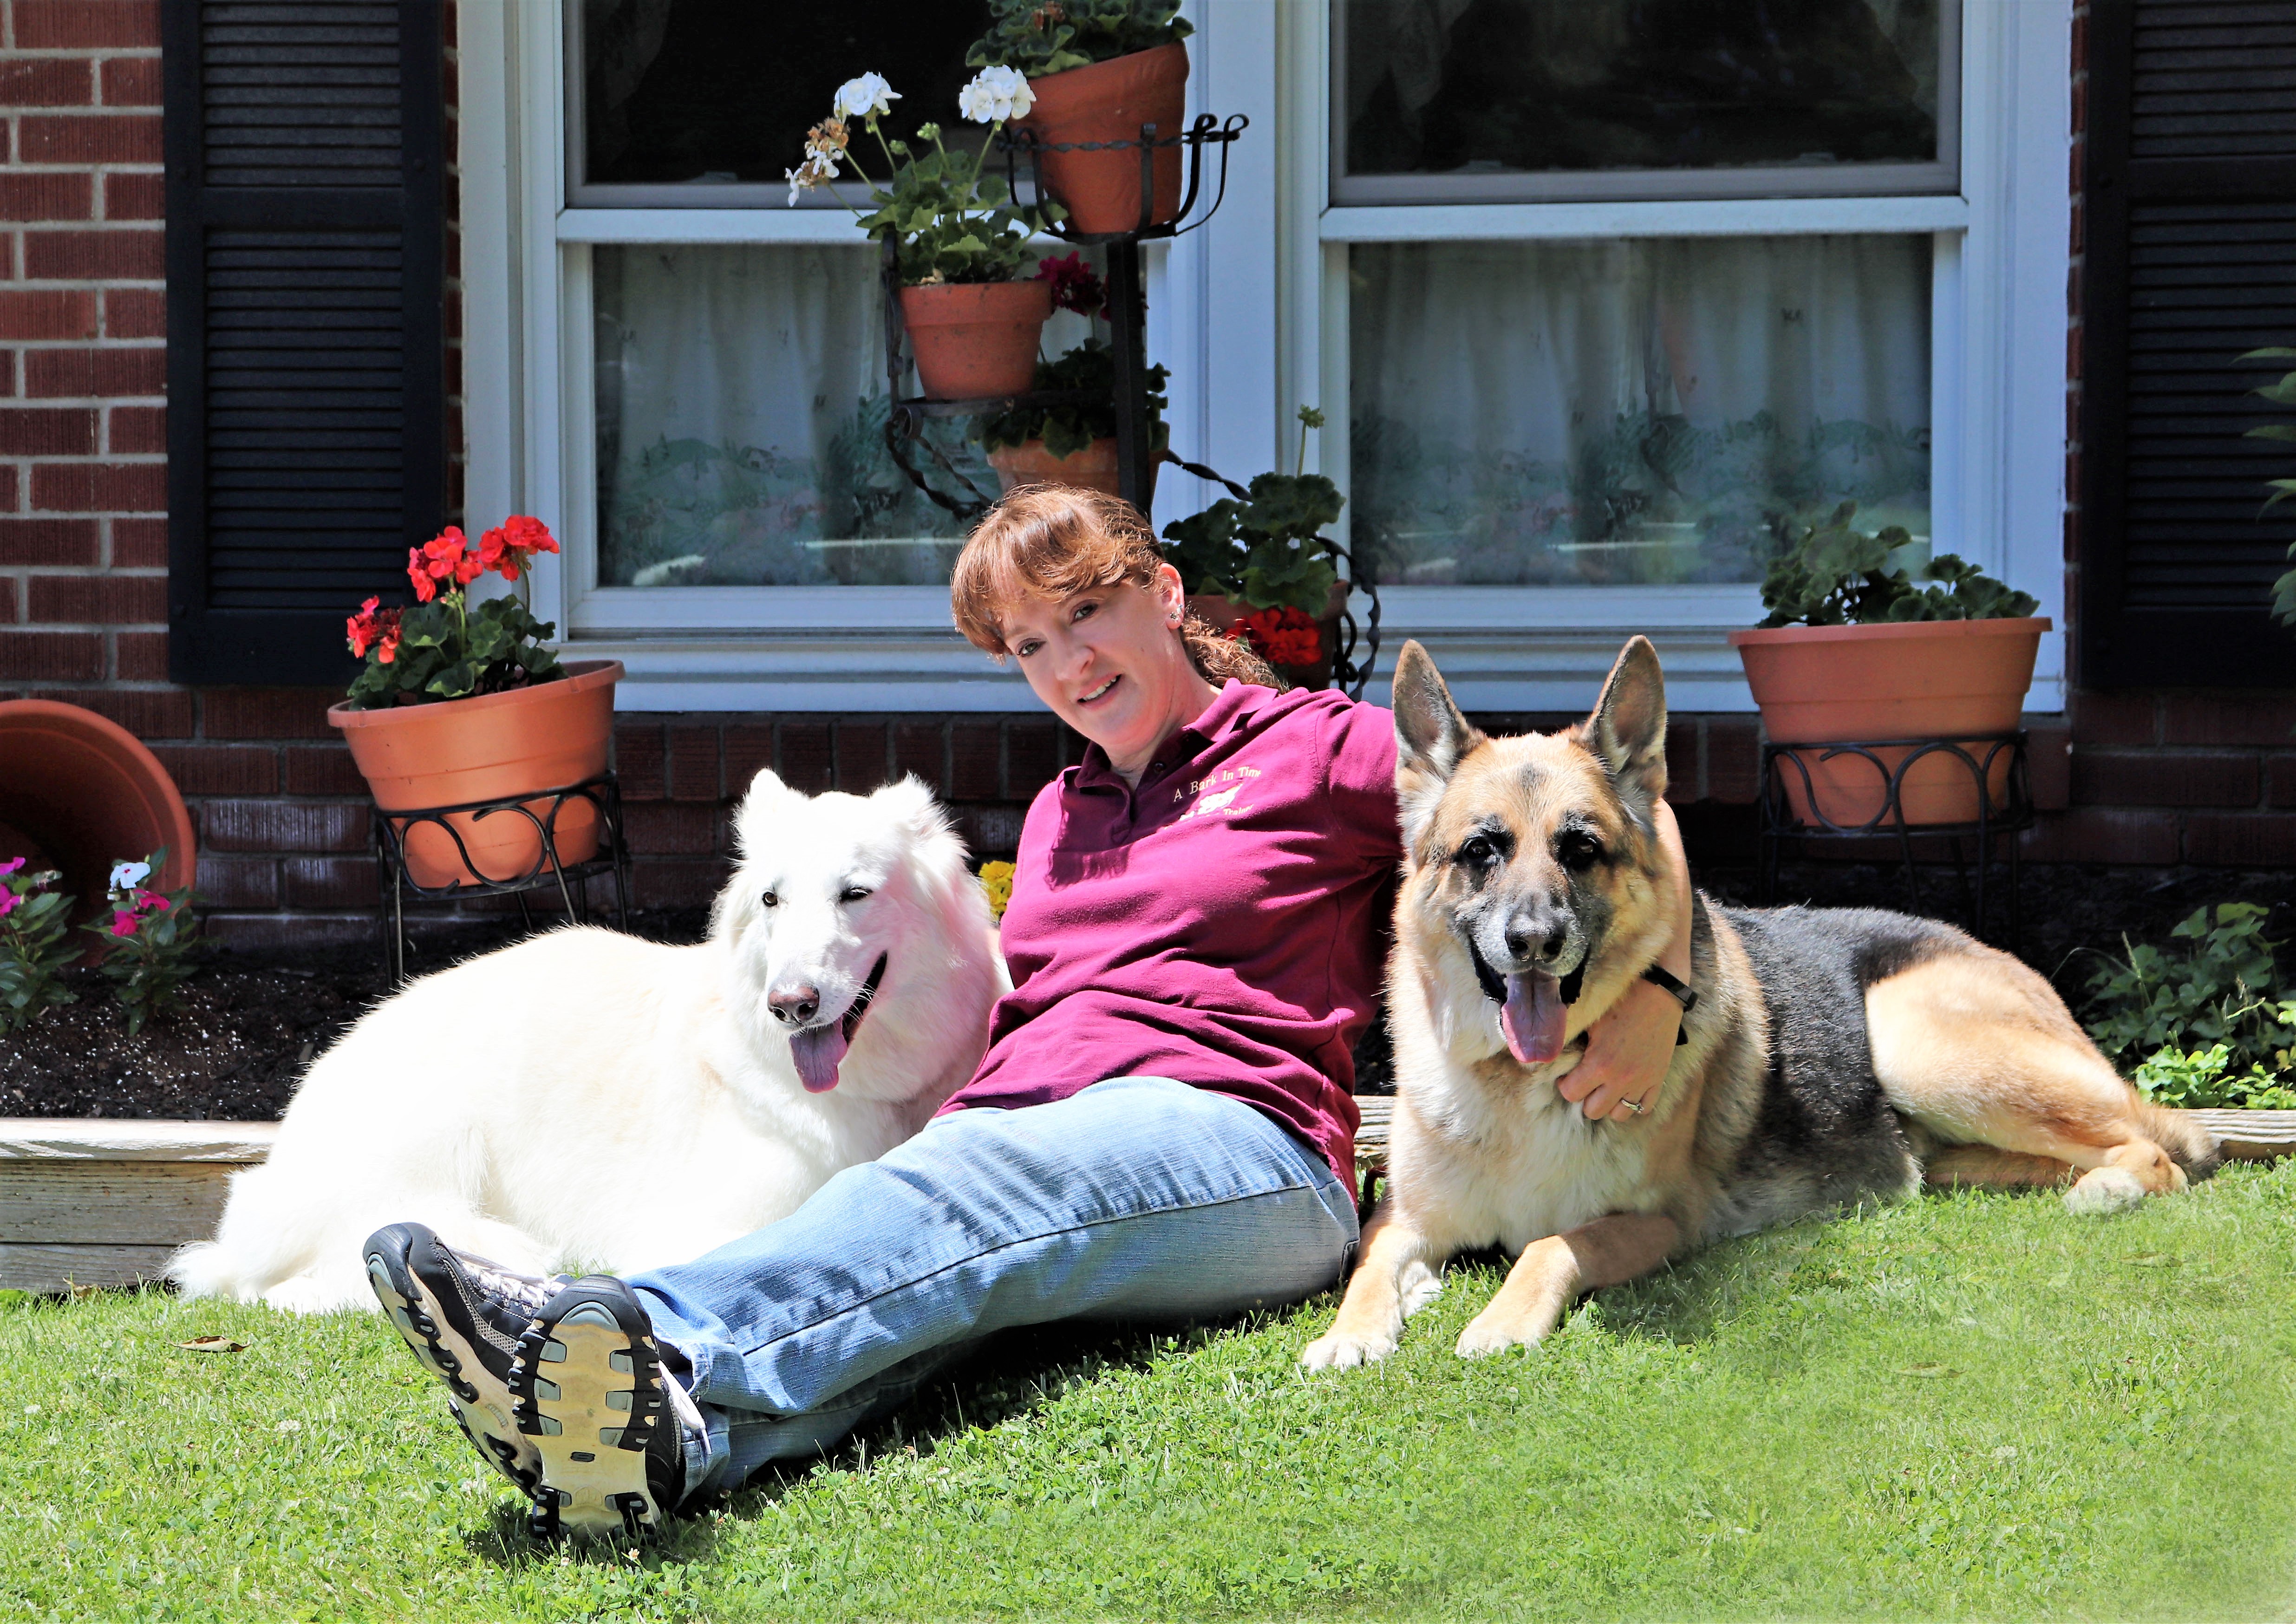 Carol sitting with the dogs